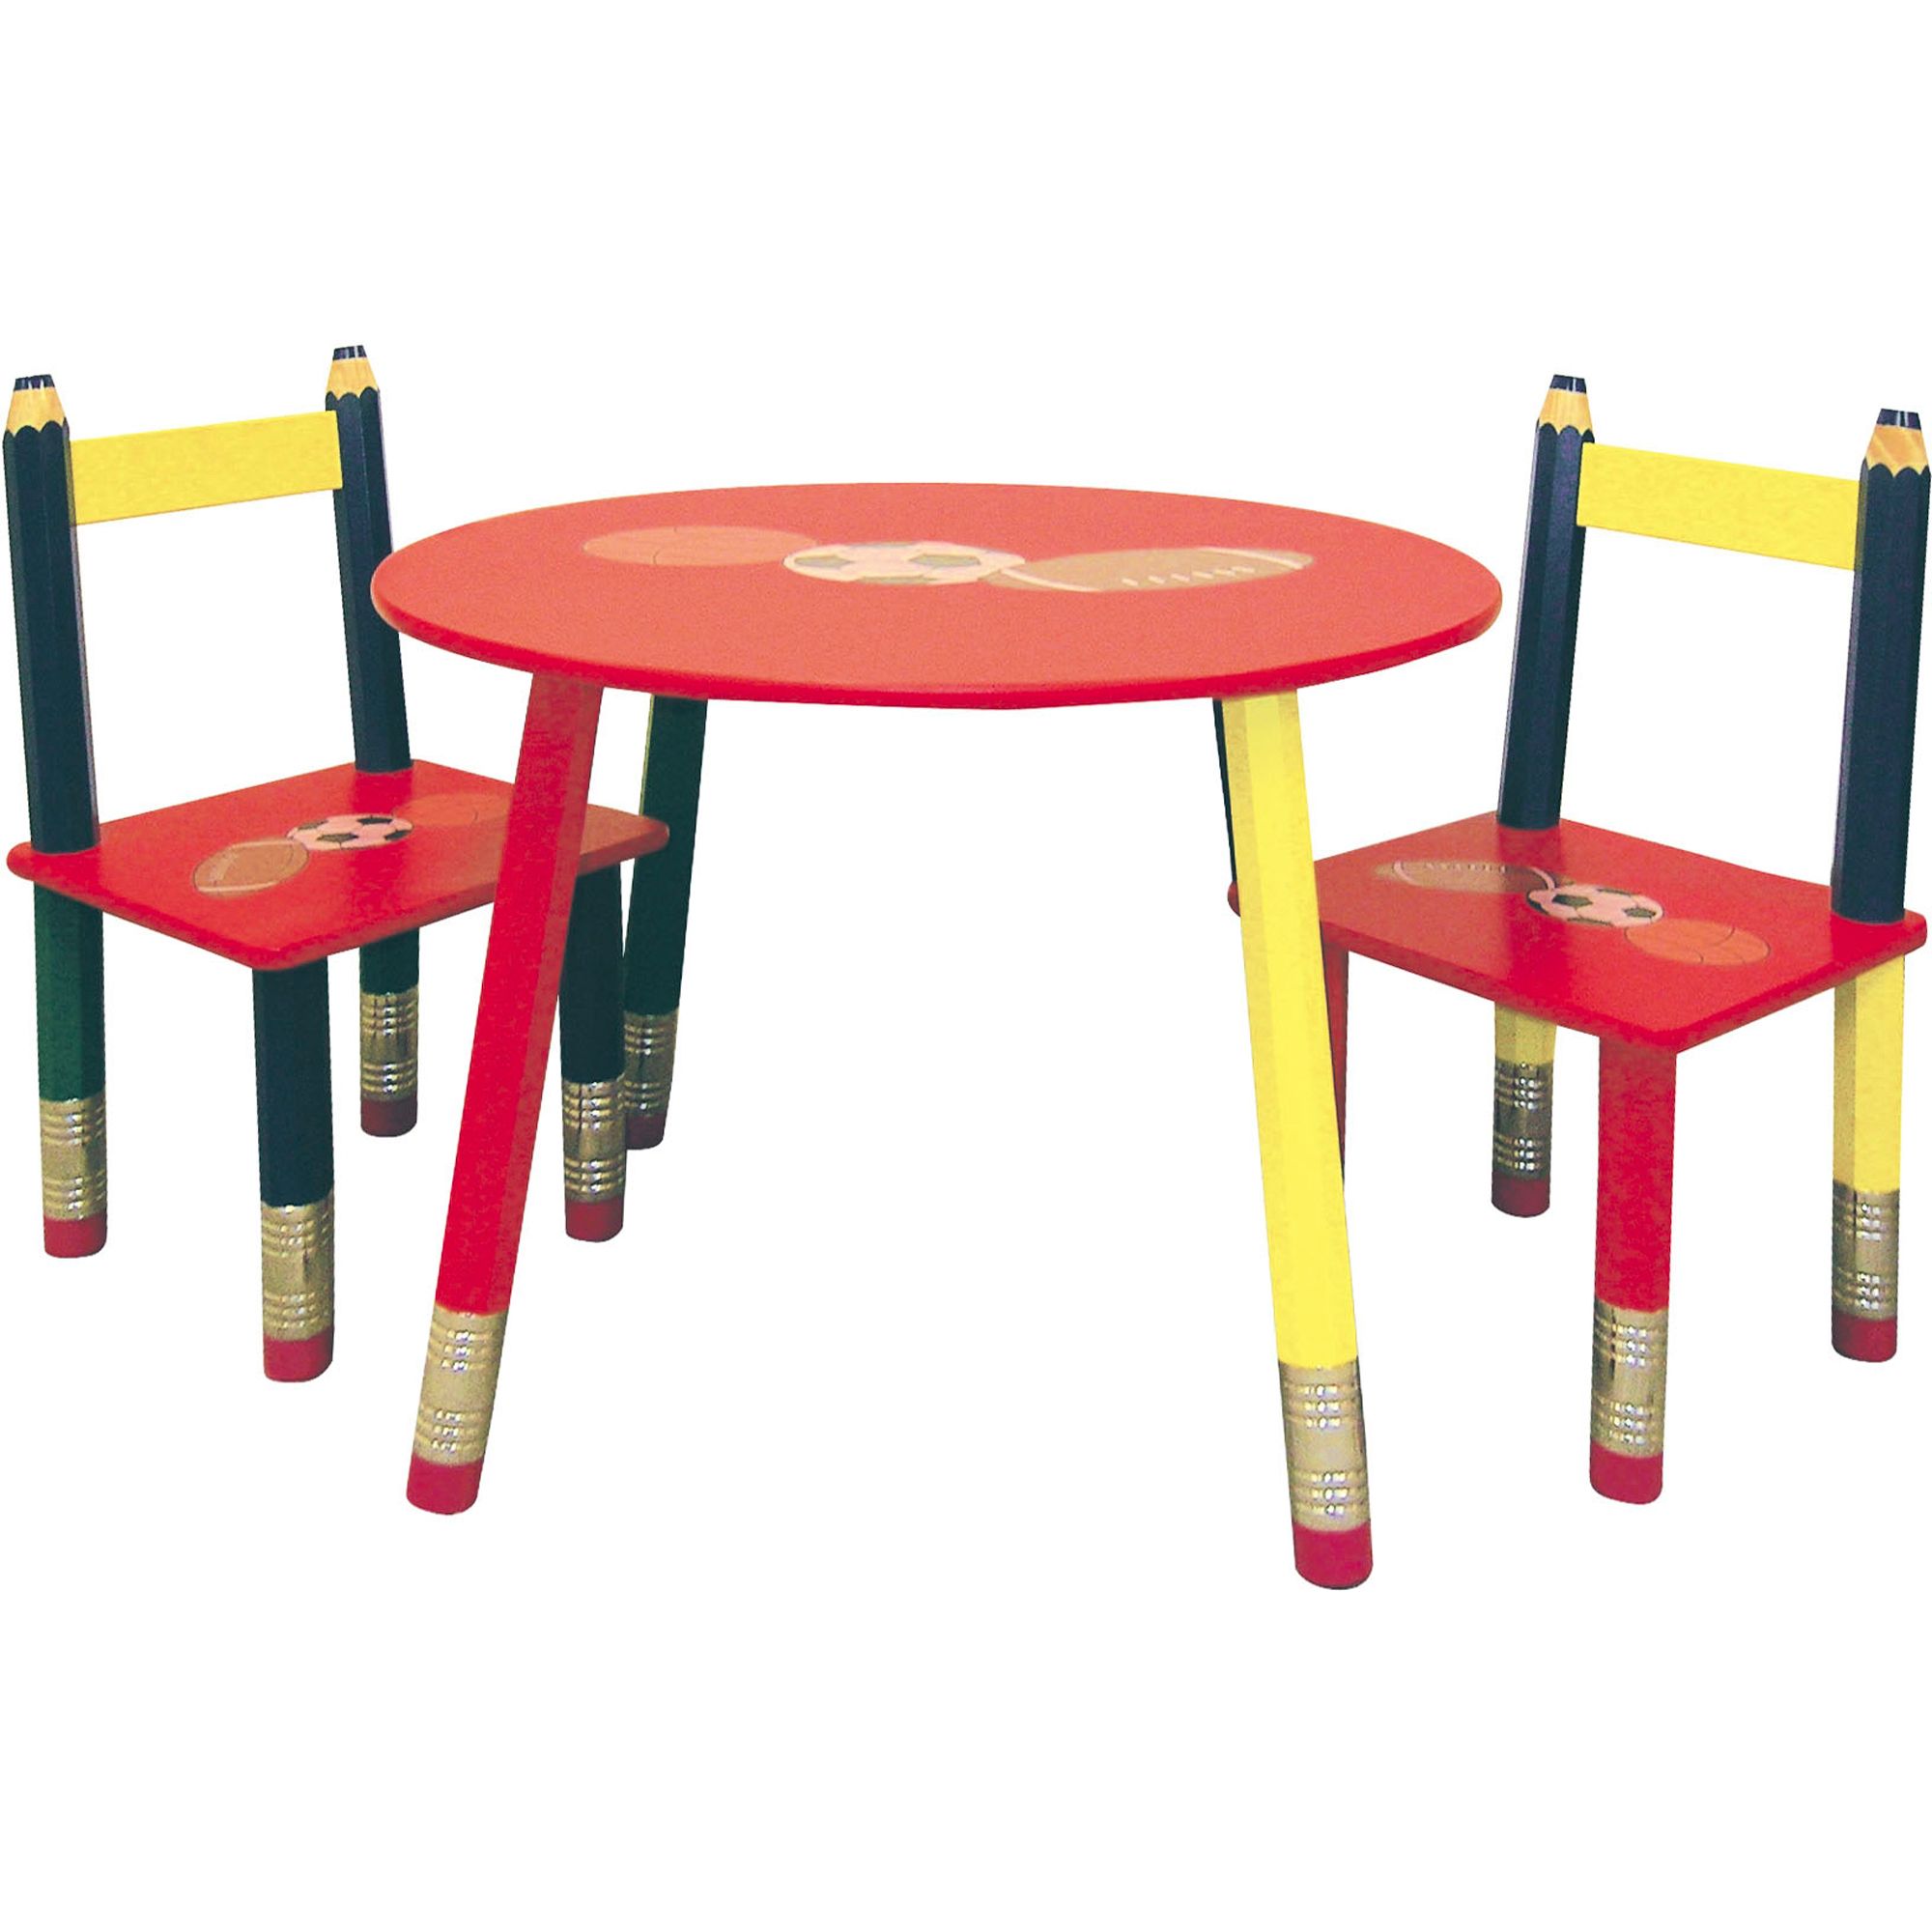 child table and chairs kmart